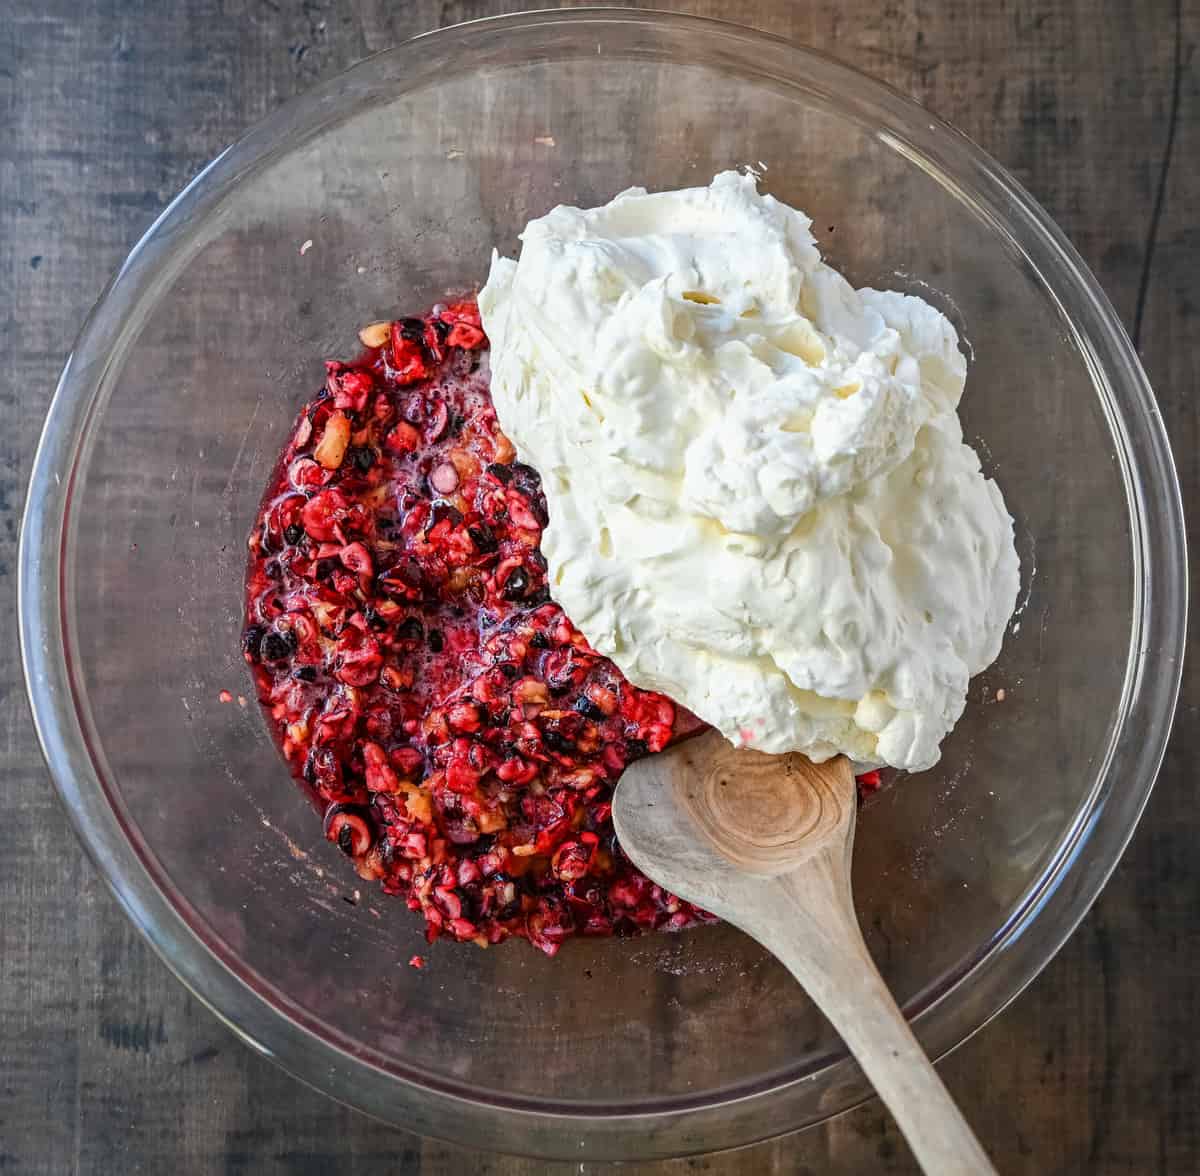 Cranberry Fluff Salad Cranberries and Whipped Cream in a bowl